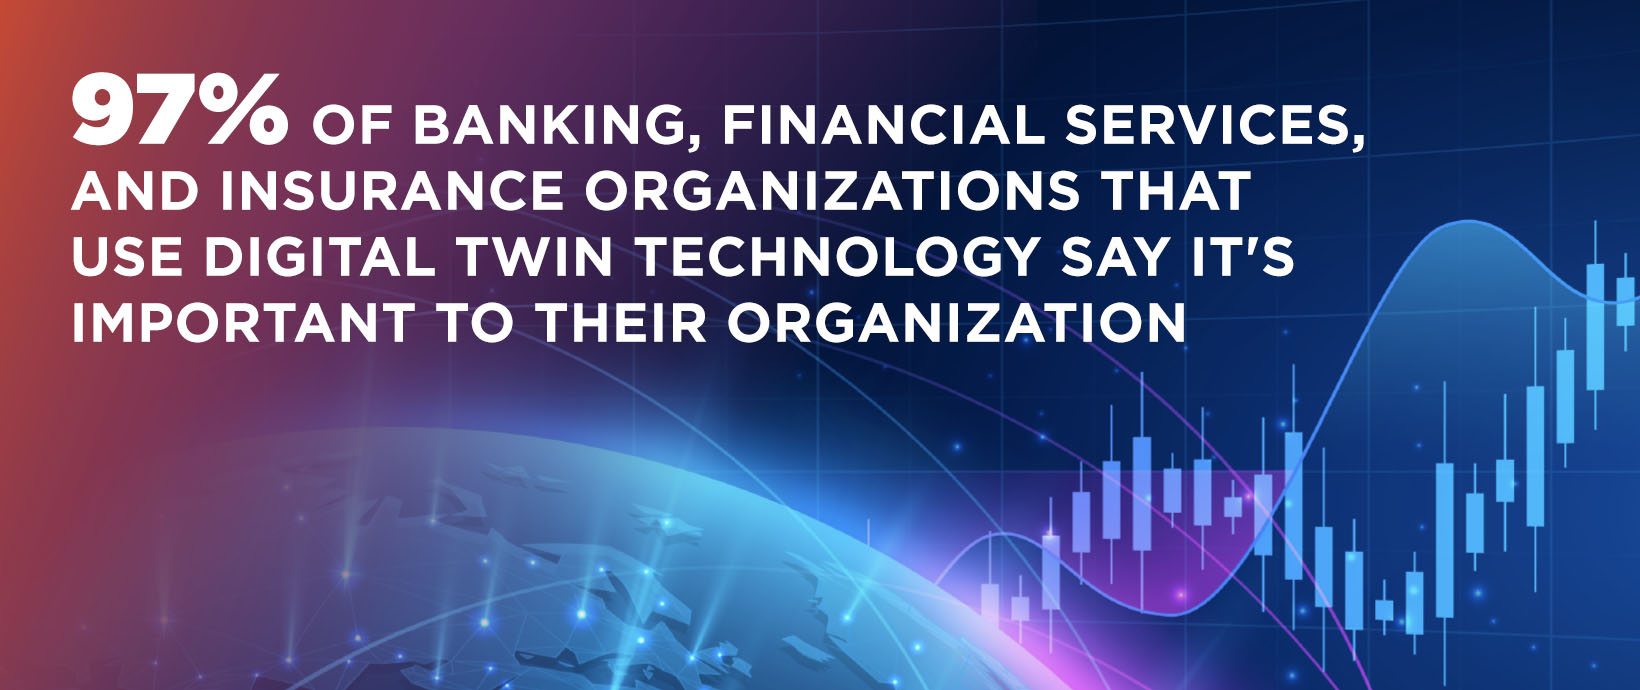 Altair Global Survey Reveals Growing Impact of Digital Twin Technology in Banking, Financial Services, and Insurance Industries